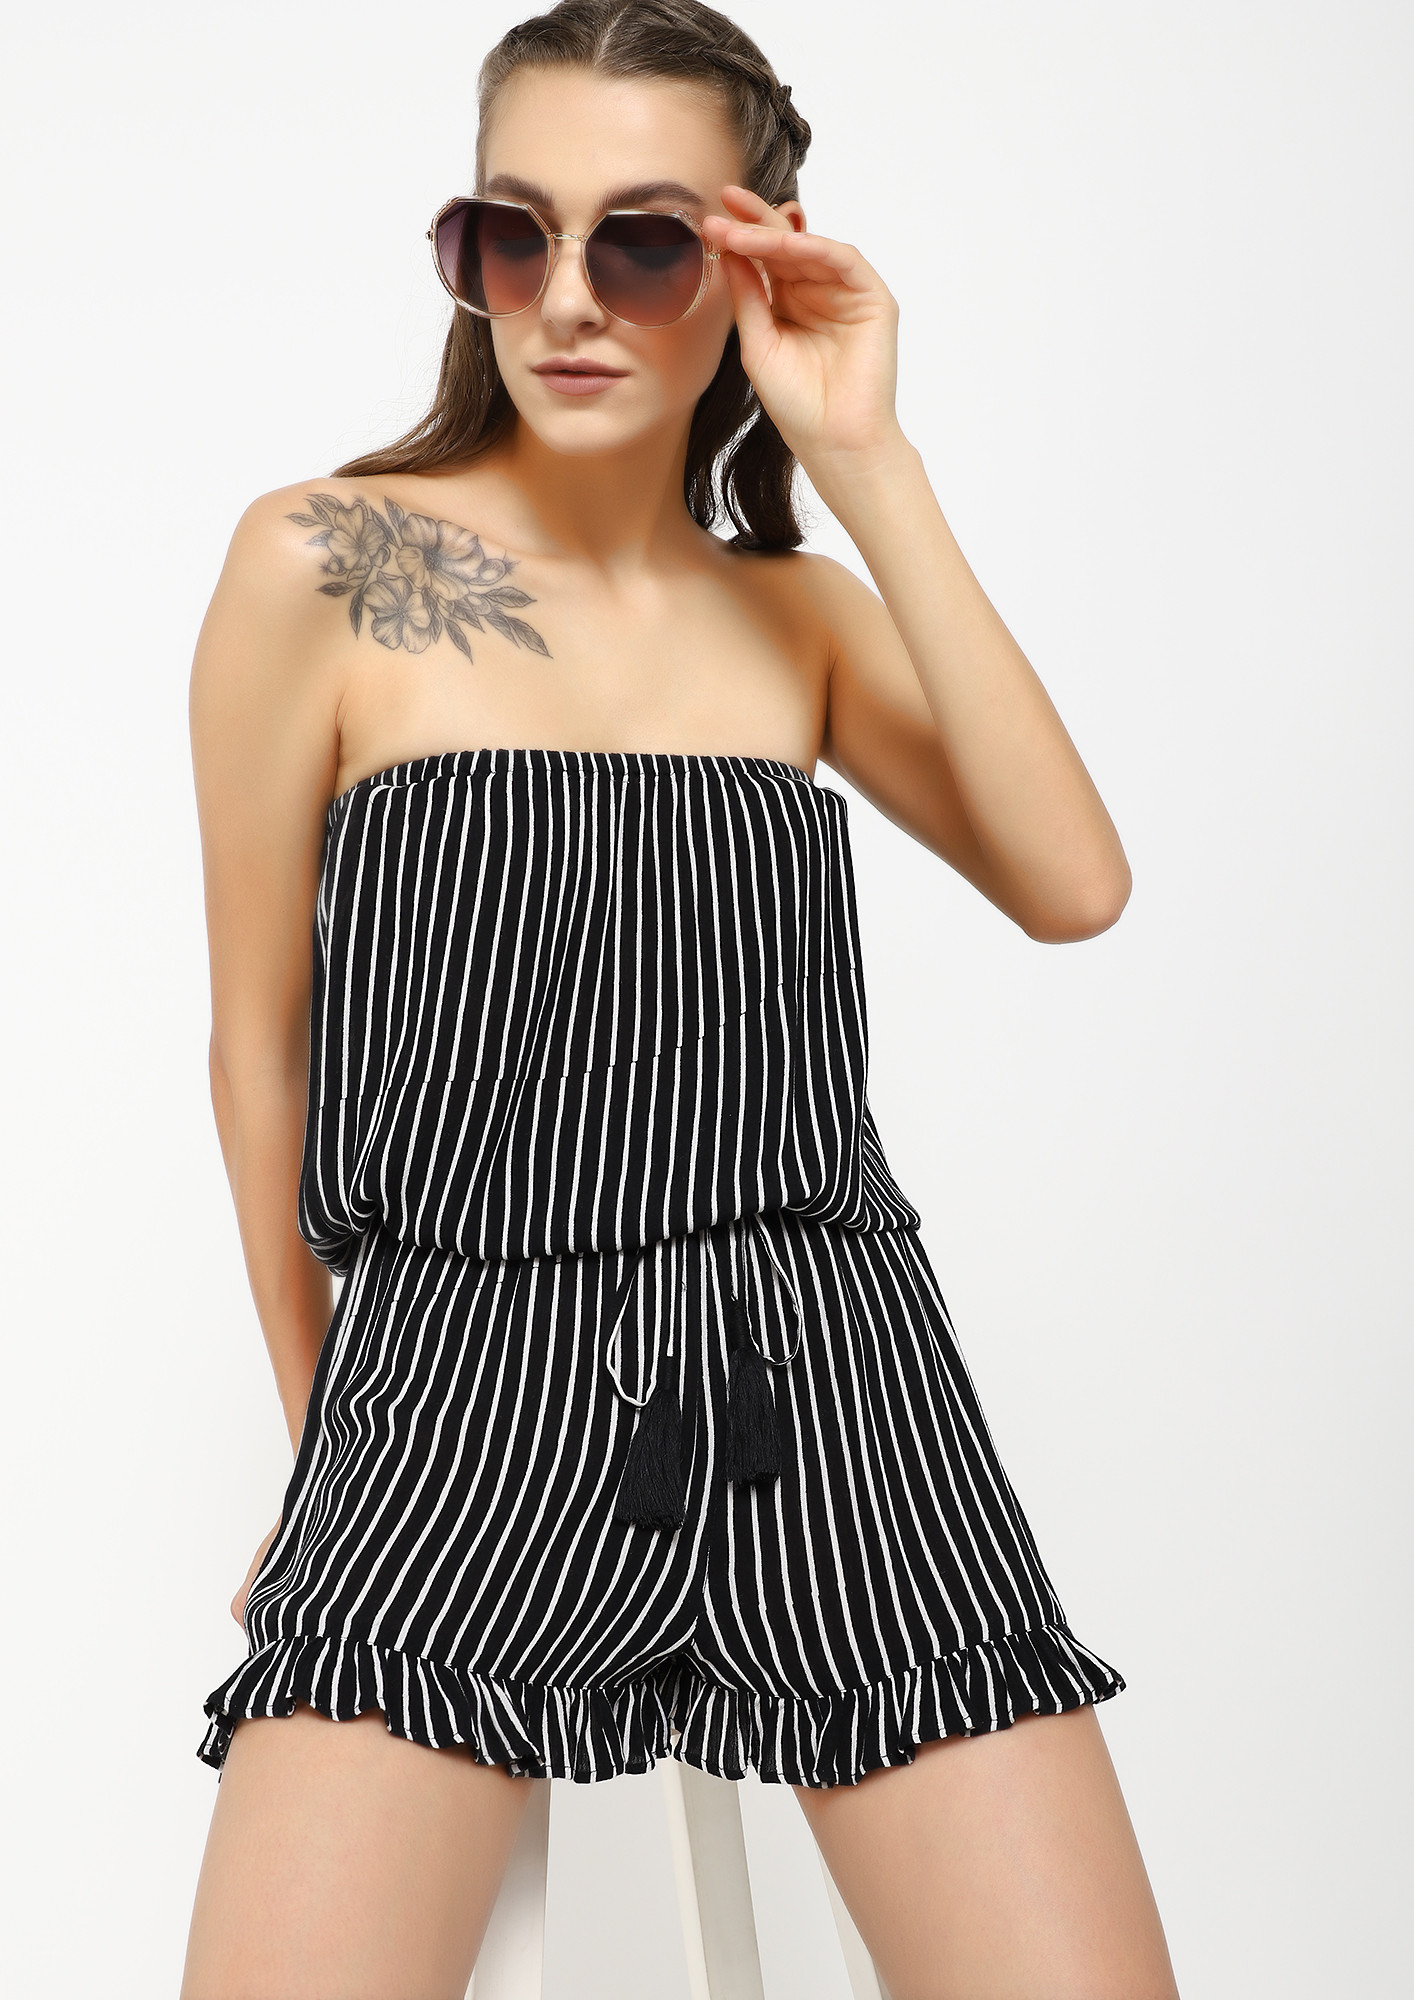 OFFLOAD YOUR WORRIES BLACK WHITE ROMPER